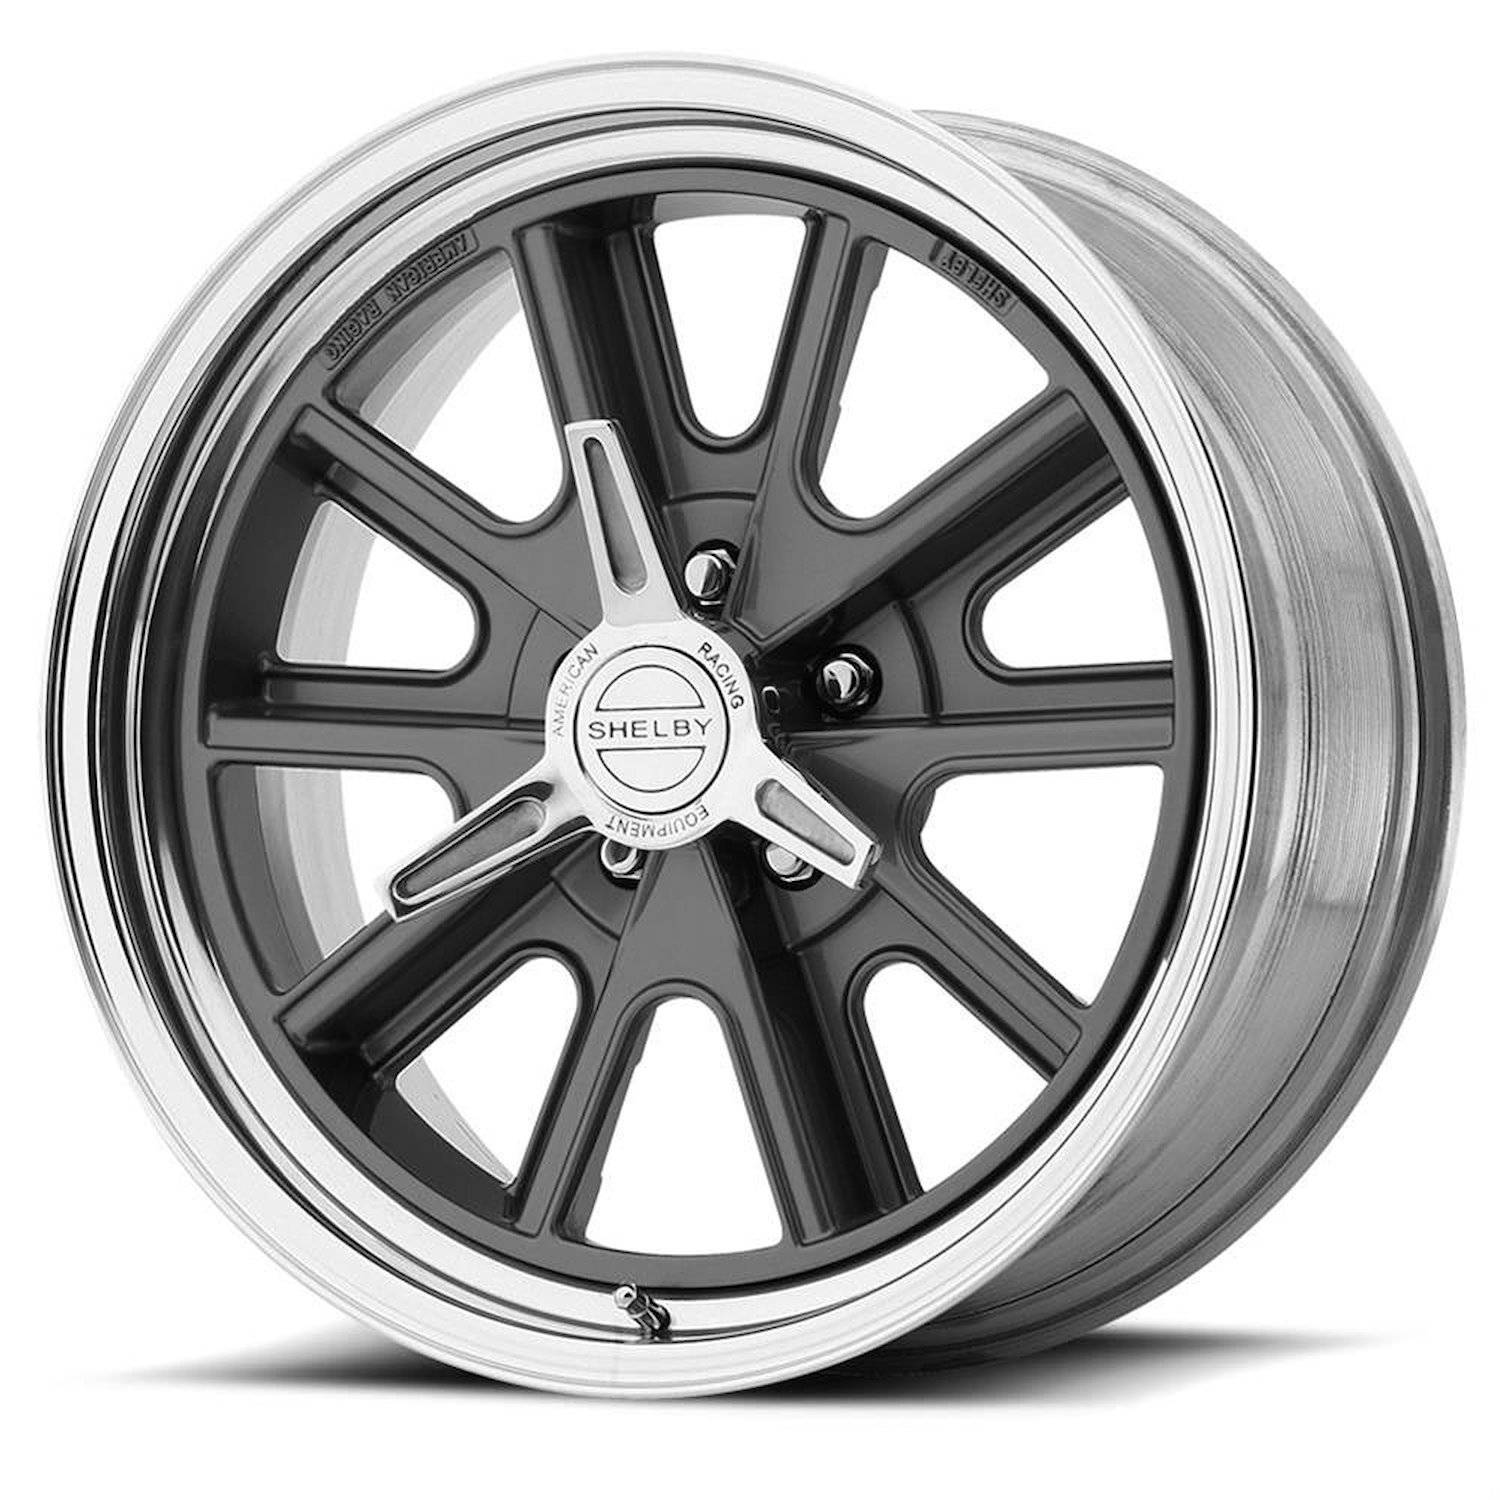 AMERICAN RACING 427 SHELBY COBRA TWO-PIECE MAG GRAY CENTER POLISHED BARREL 17 x 8 5X4.75 -12 4.03